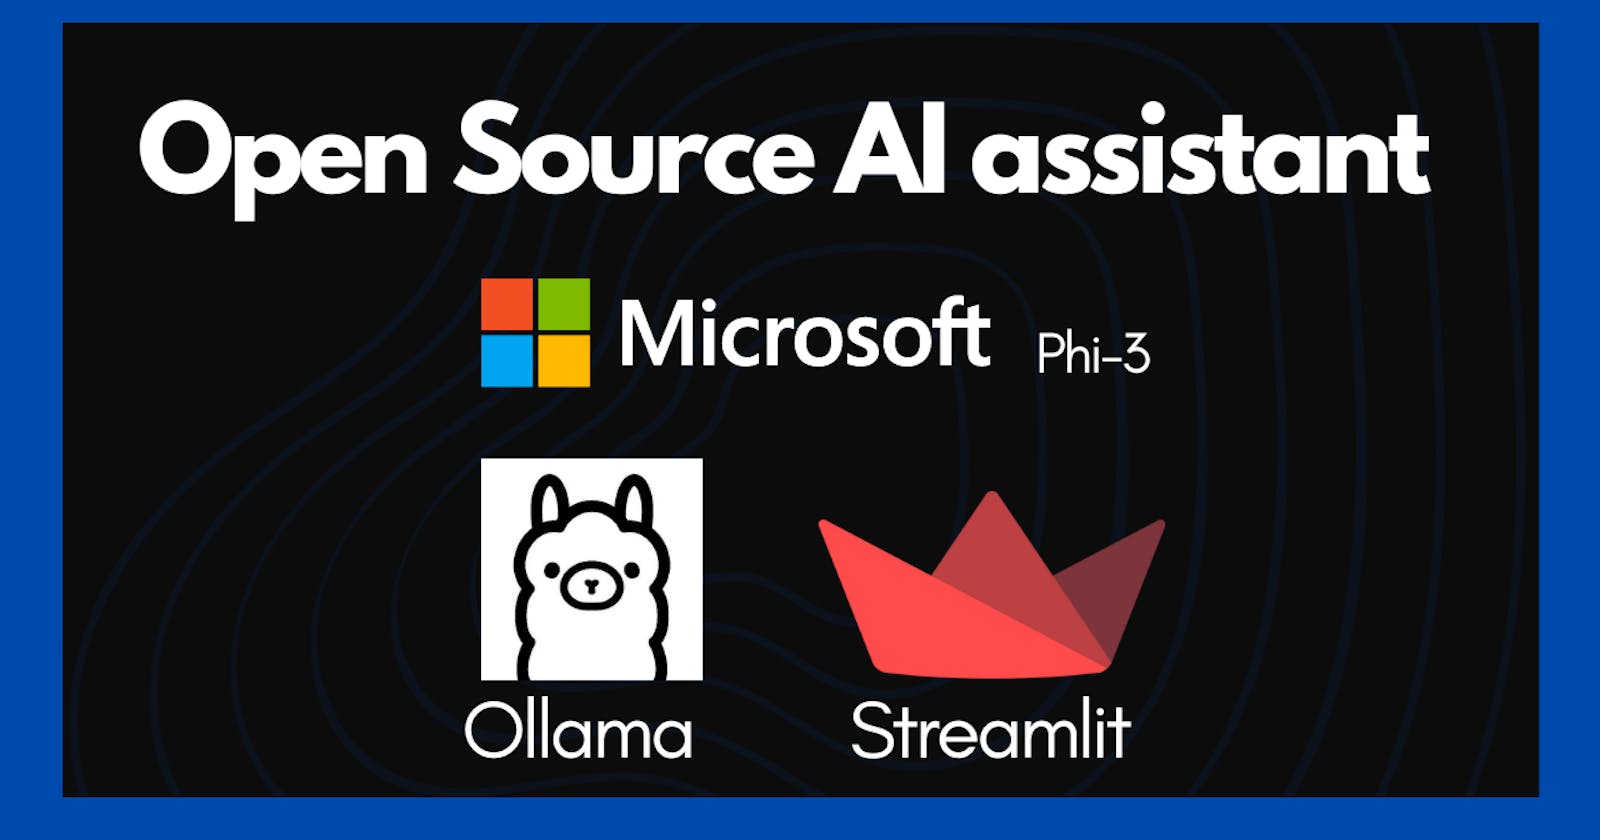 Build an open source AI assistant with Streamlit, Microsoft Phi-3 & Ollama